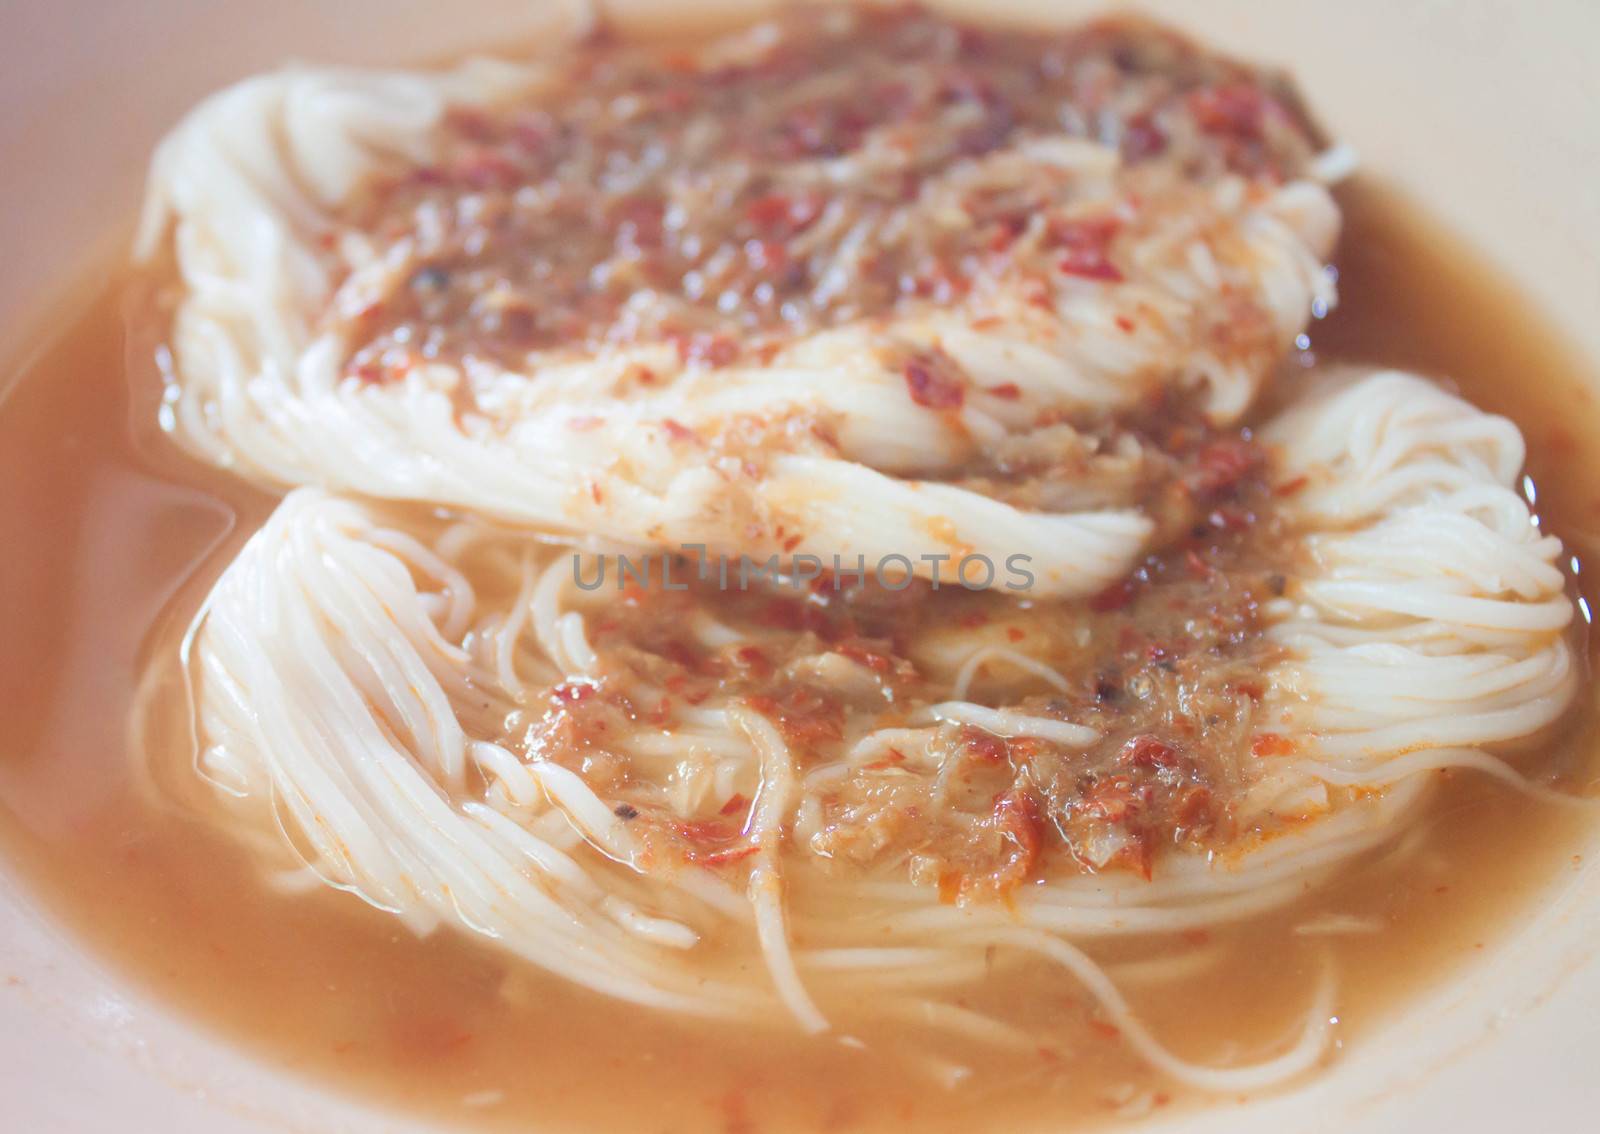 Vermicelli with agents Is a popular food in Thailand